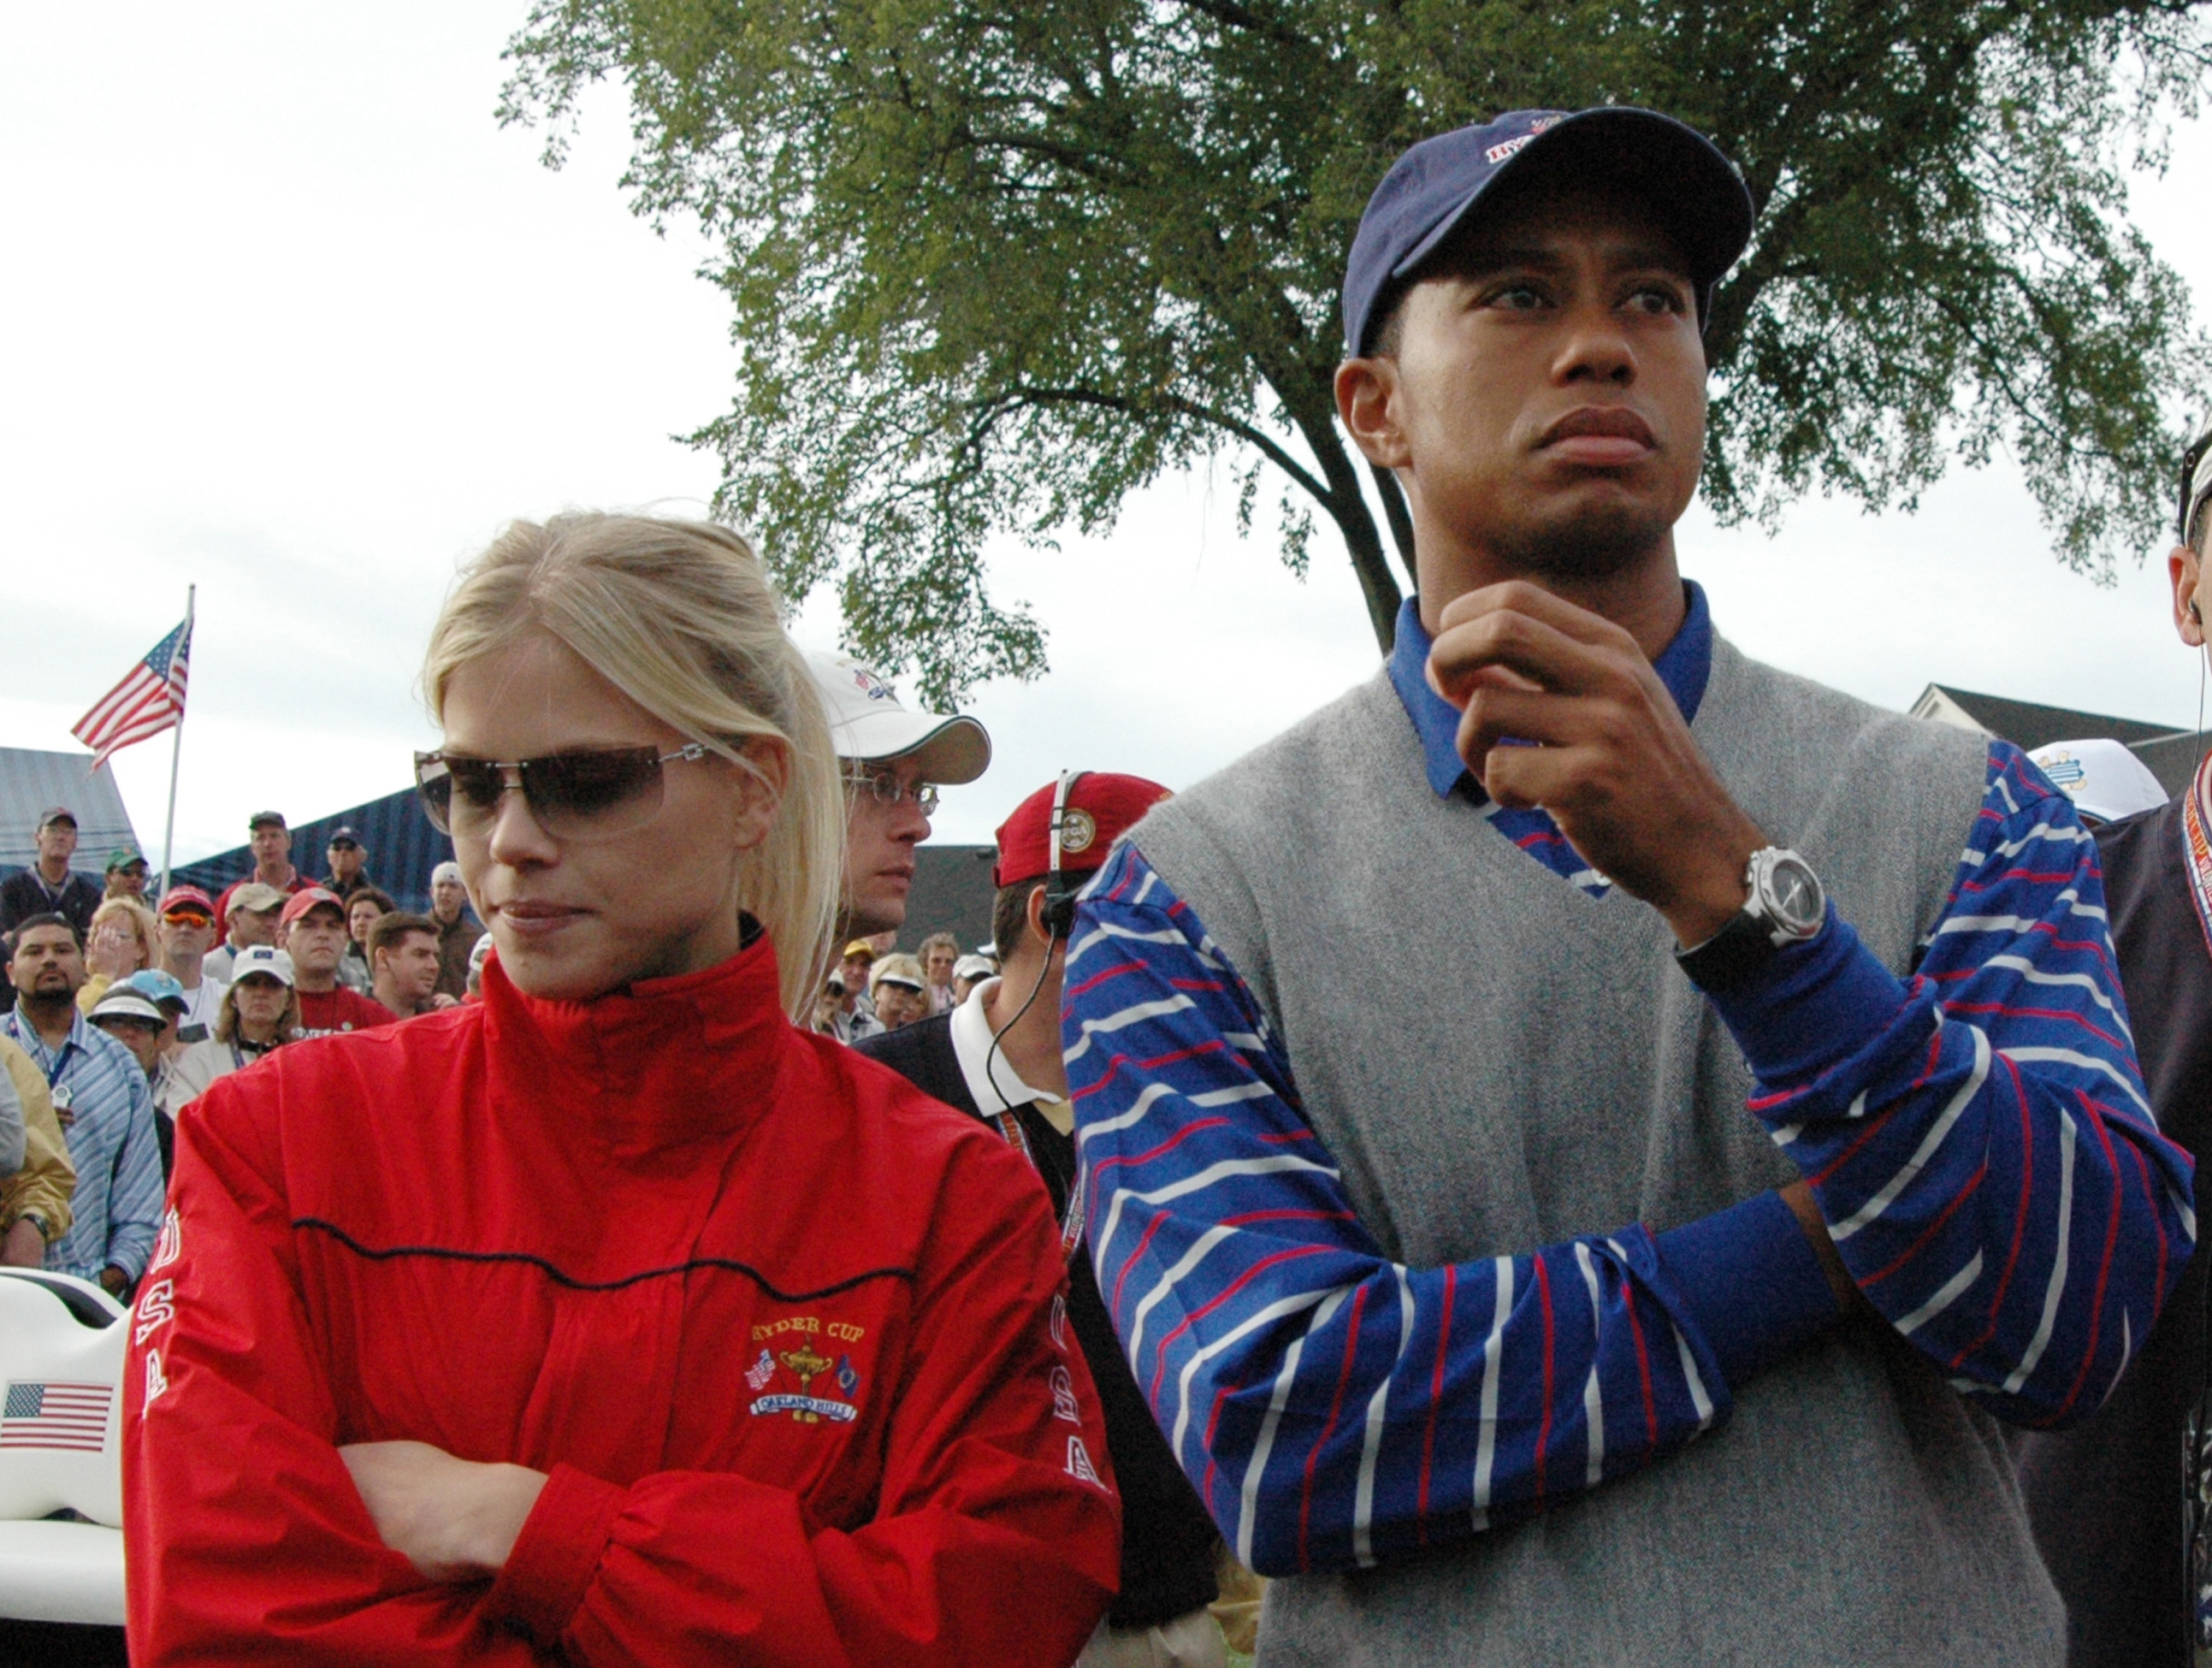 Tiger Woods standing next to his ex-wife, Elin Nordegren, at the 2004 Ryder Cup